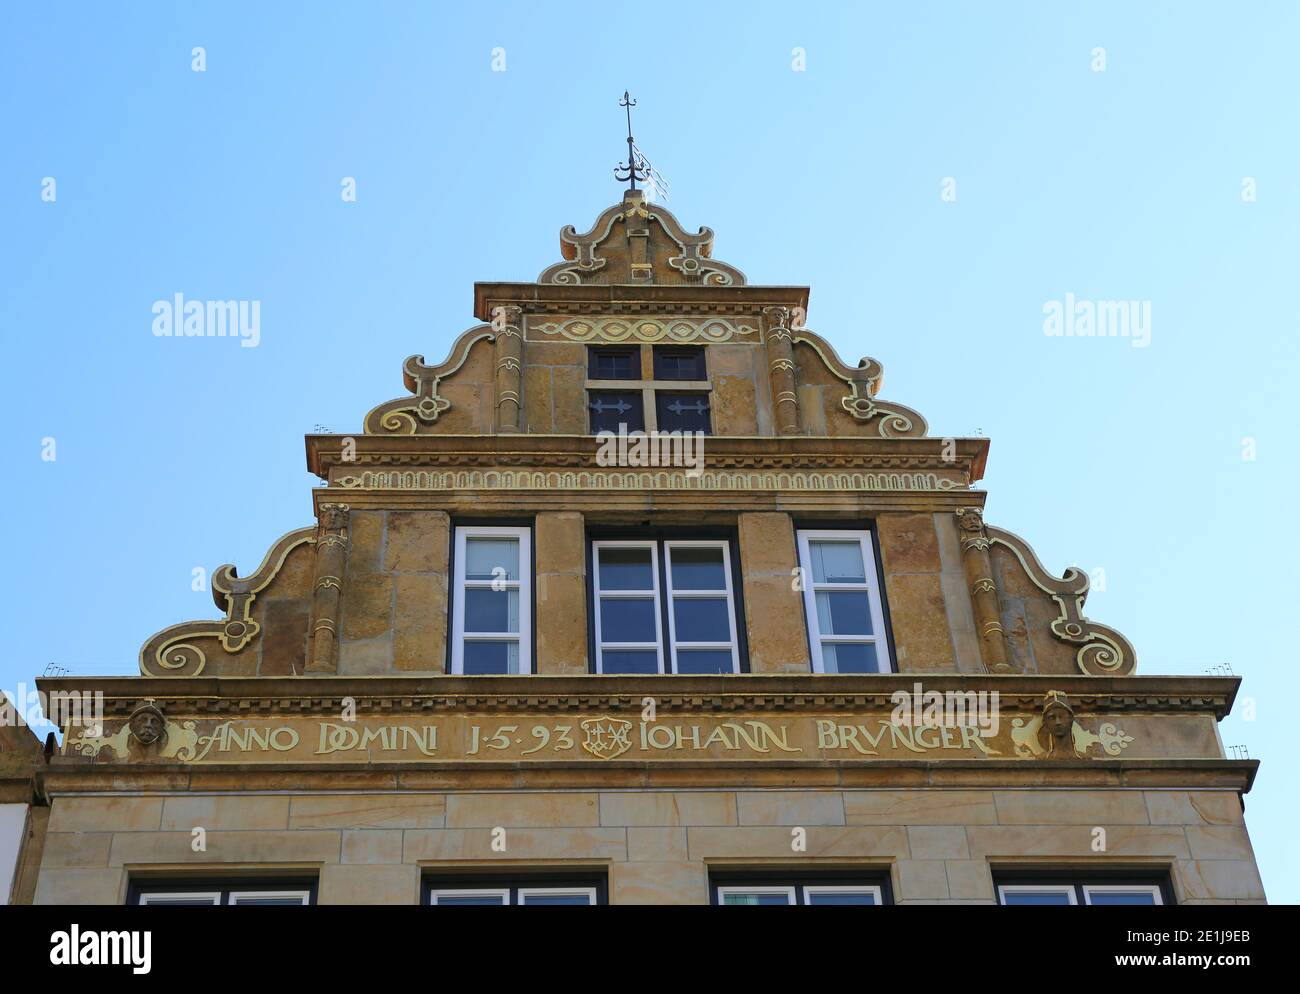 Details of Old Historic Building in Bielefeld,Germany Stock Photo